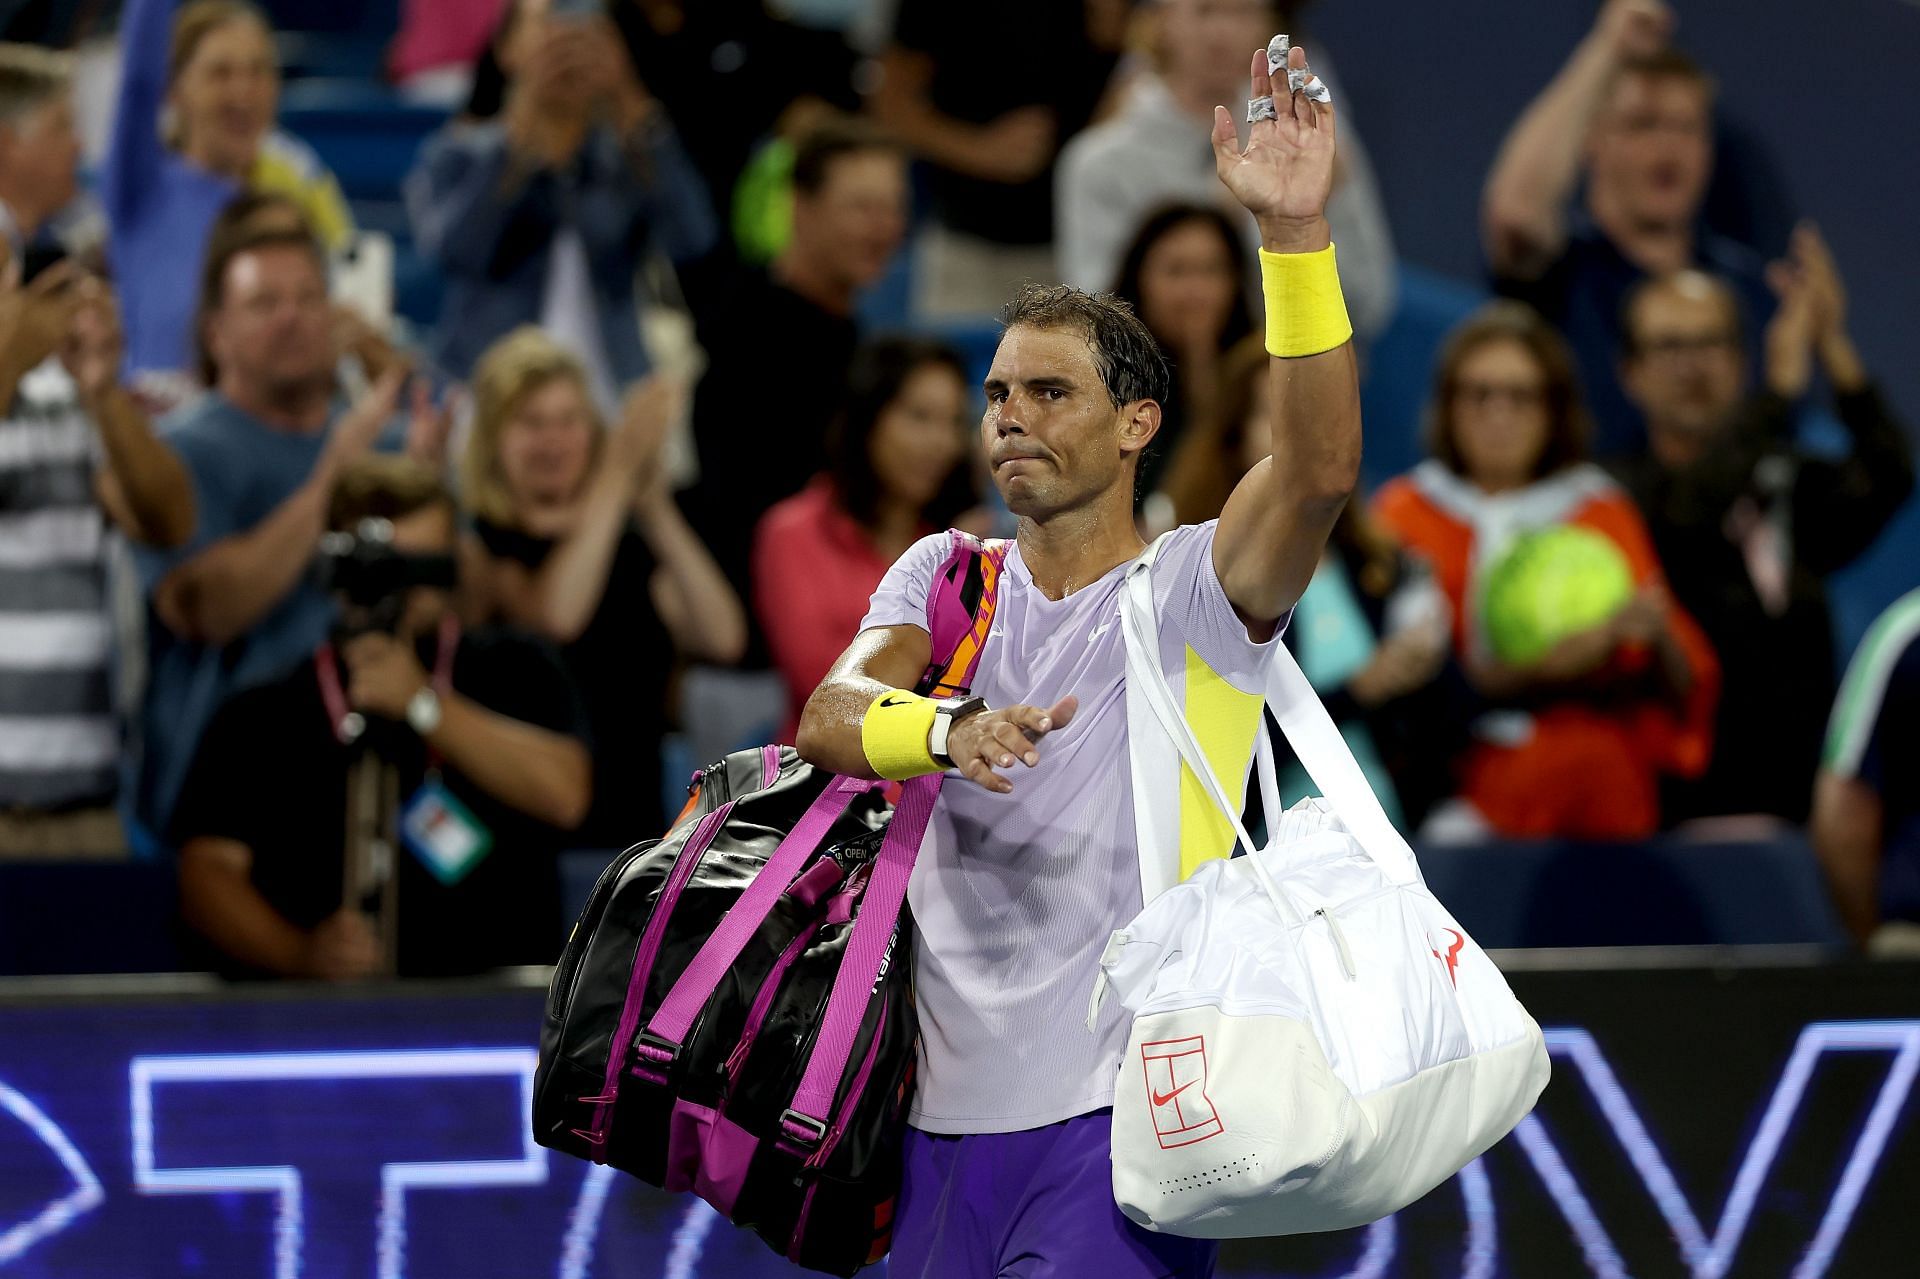 Rafael Nadal will be the second seed at the US Open.